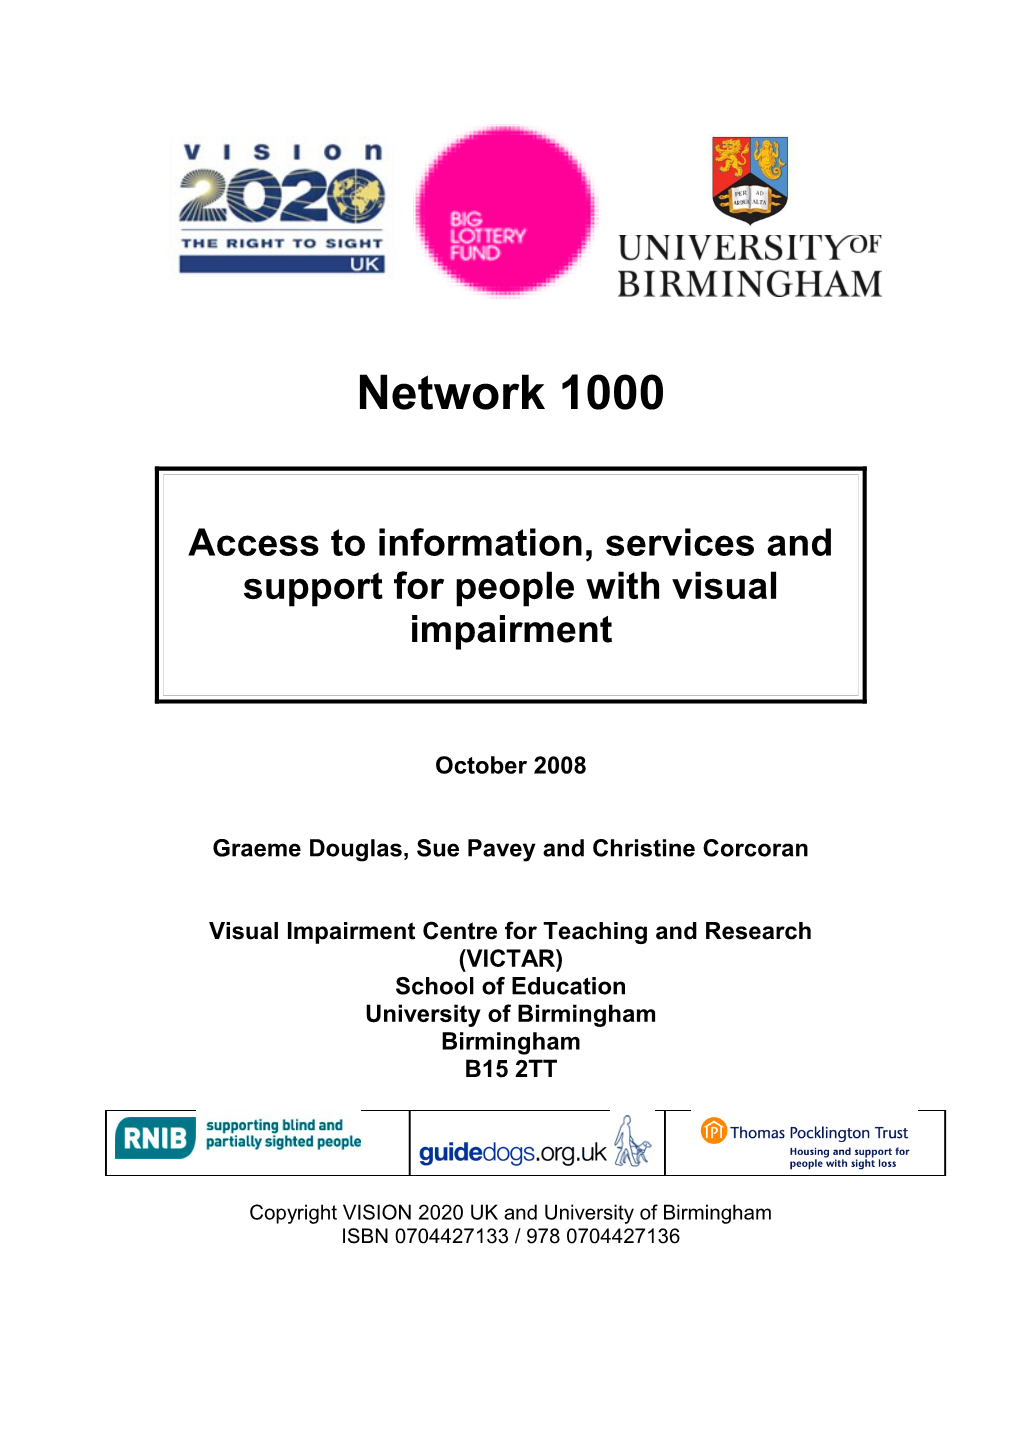 Network 1000: Access to Information, Services and Support for People with a Visual Impairment